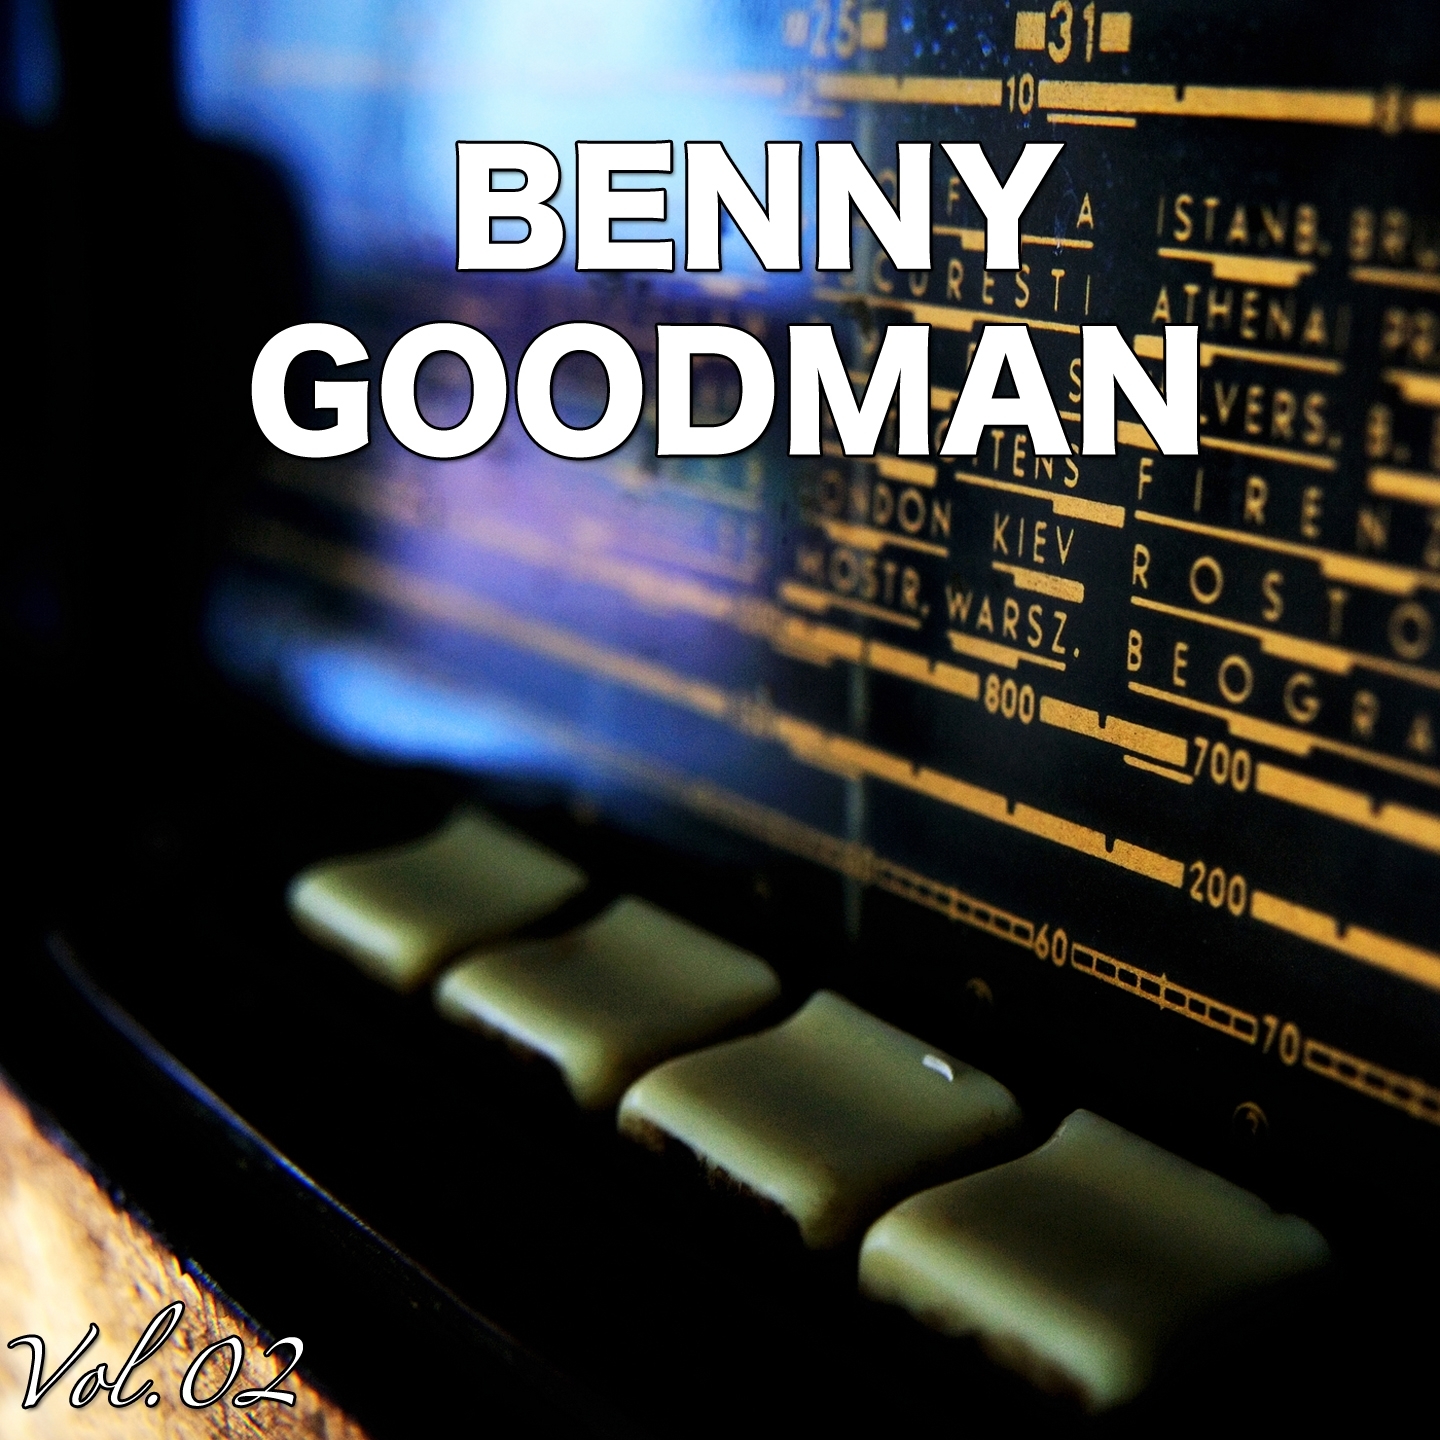 H.o.t.S Presents : The Very Best of Benny Goodman, Vol. 2